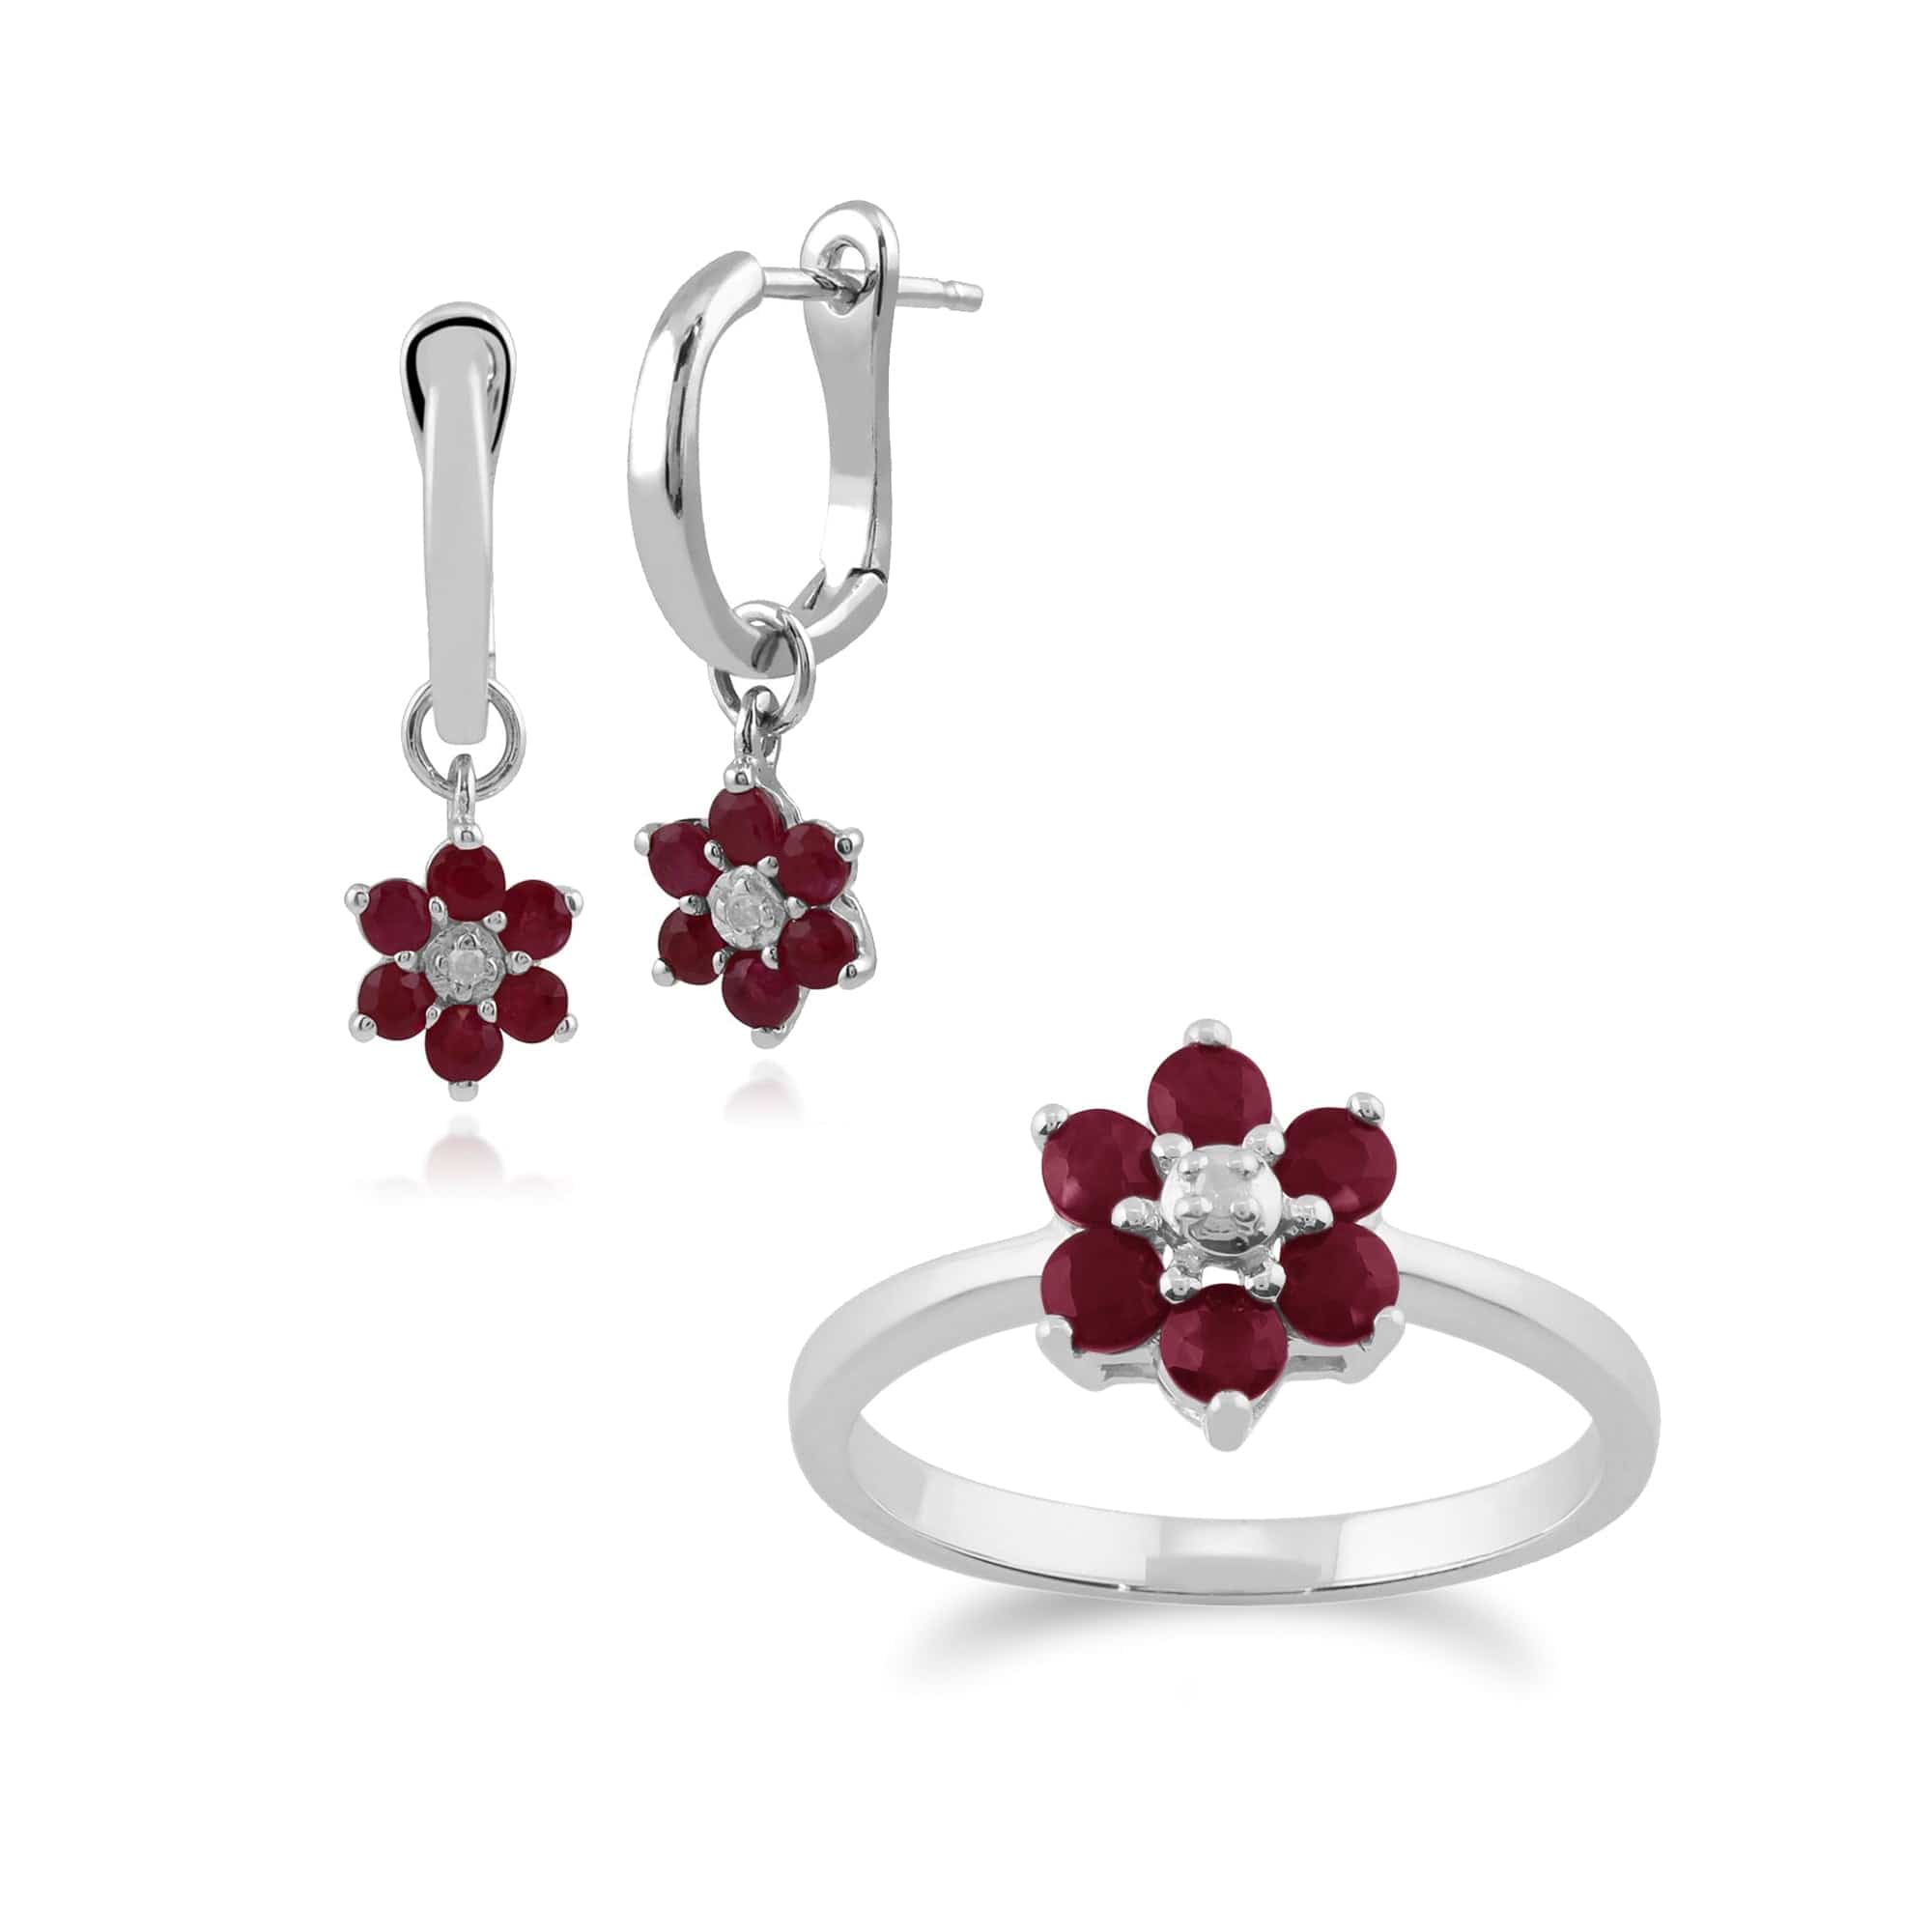 Floral Round Ruby & Diamond Flower Drop Earrings & Ring Set in 9ct White Gold - Gemondo